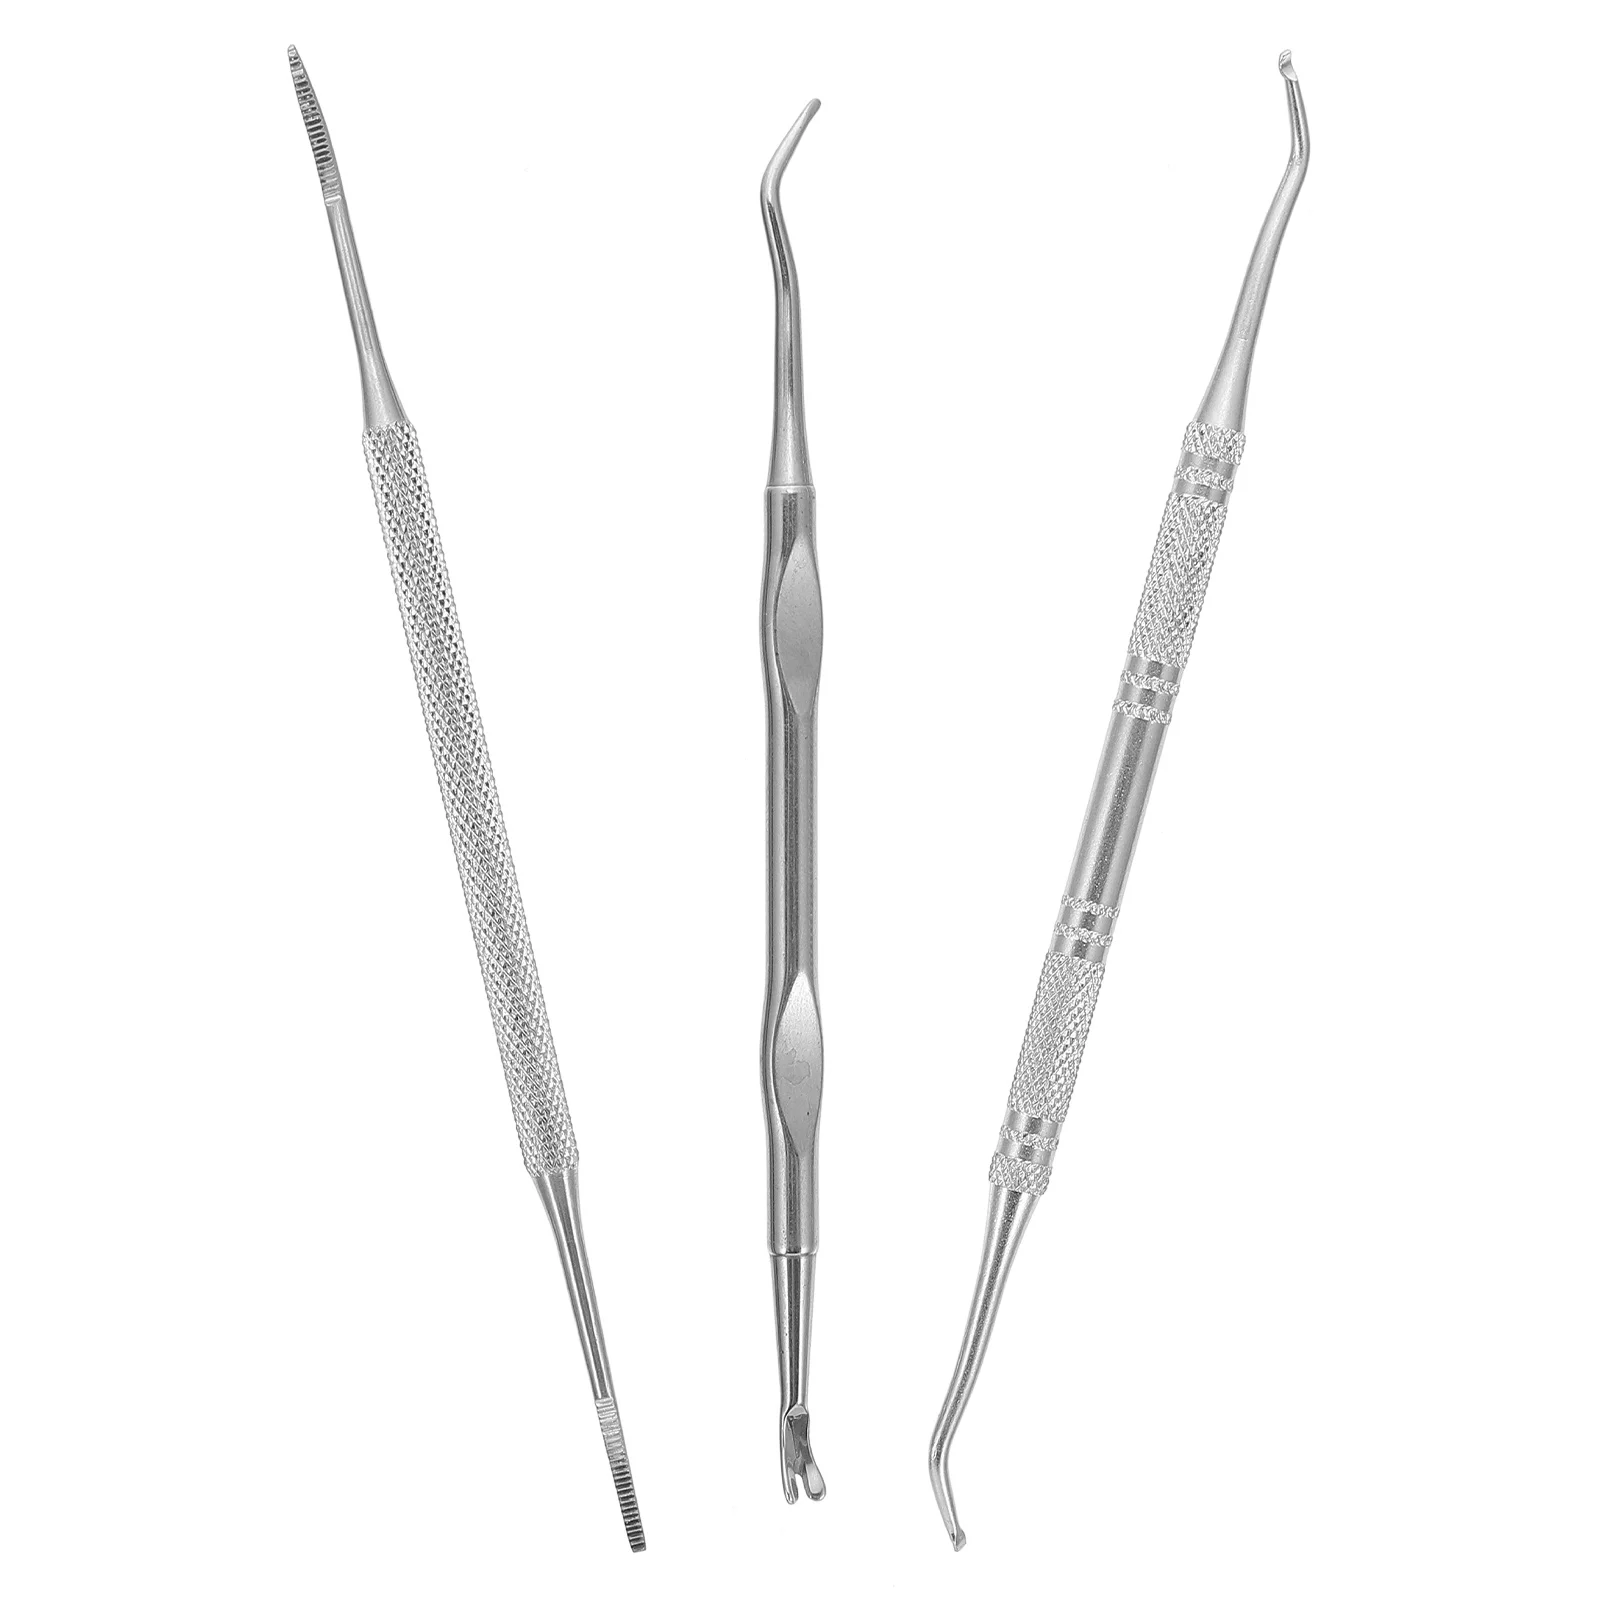 3Pcs Ingrown Toenail File Double-end Nail Cleaner Stainless Steel Tool Ingrown Toenail Lifter 3pcs high speed steel titanium step drill bits 3 12mm 4 12mm 4 20mm hss wood and metal drilling power tools